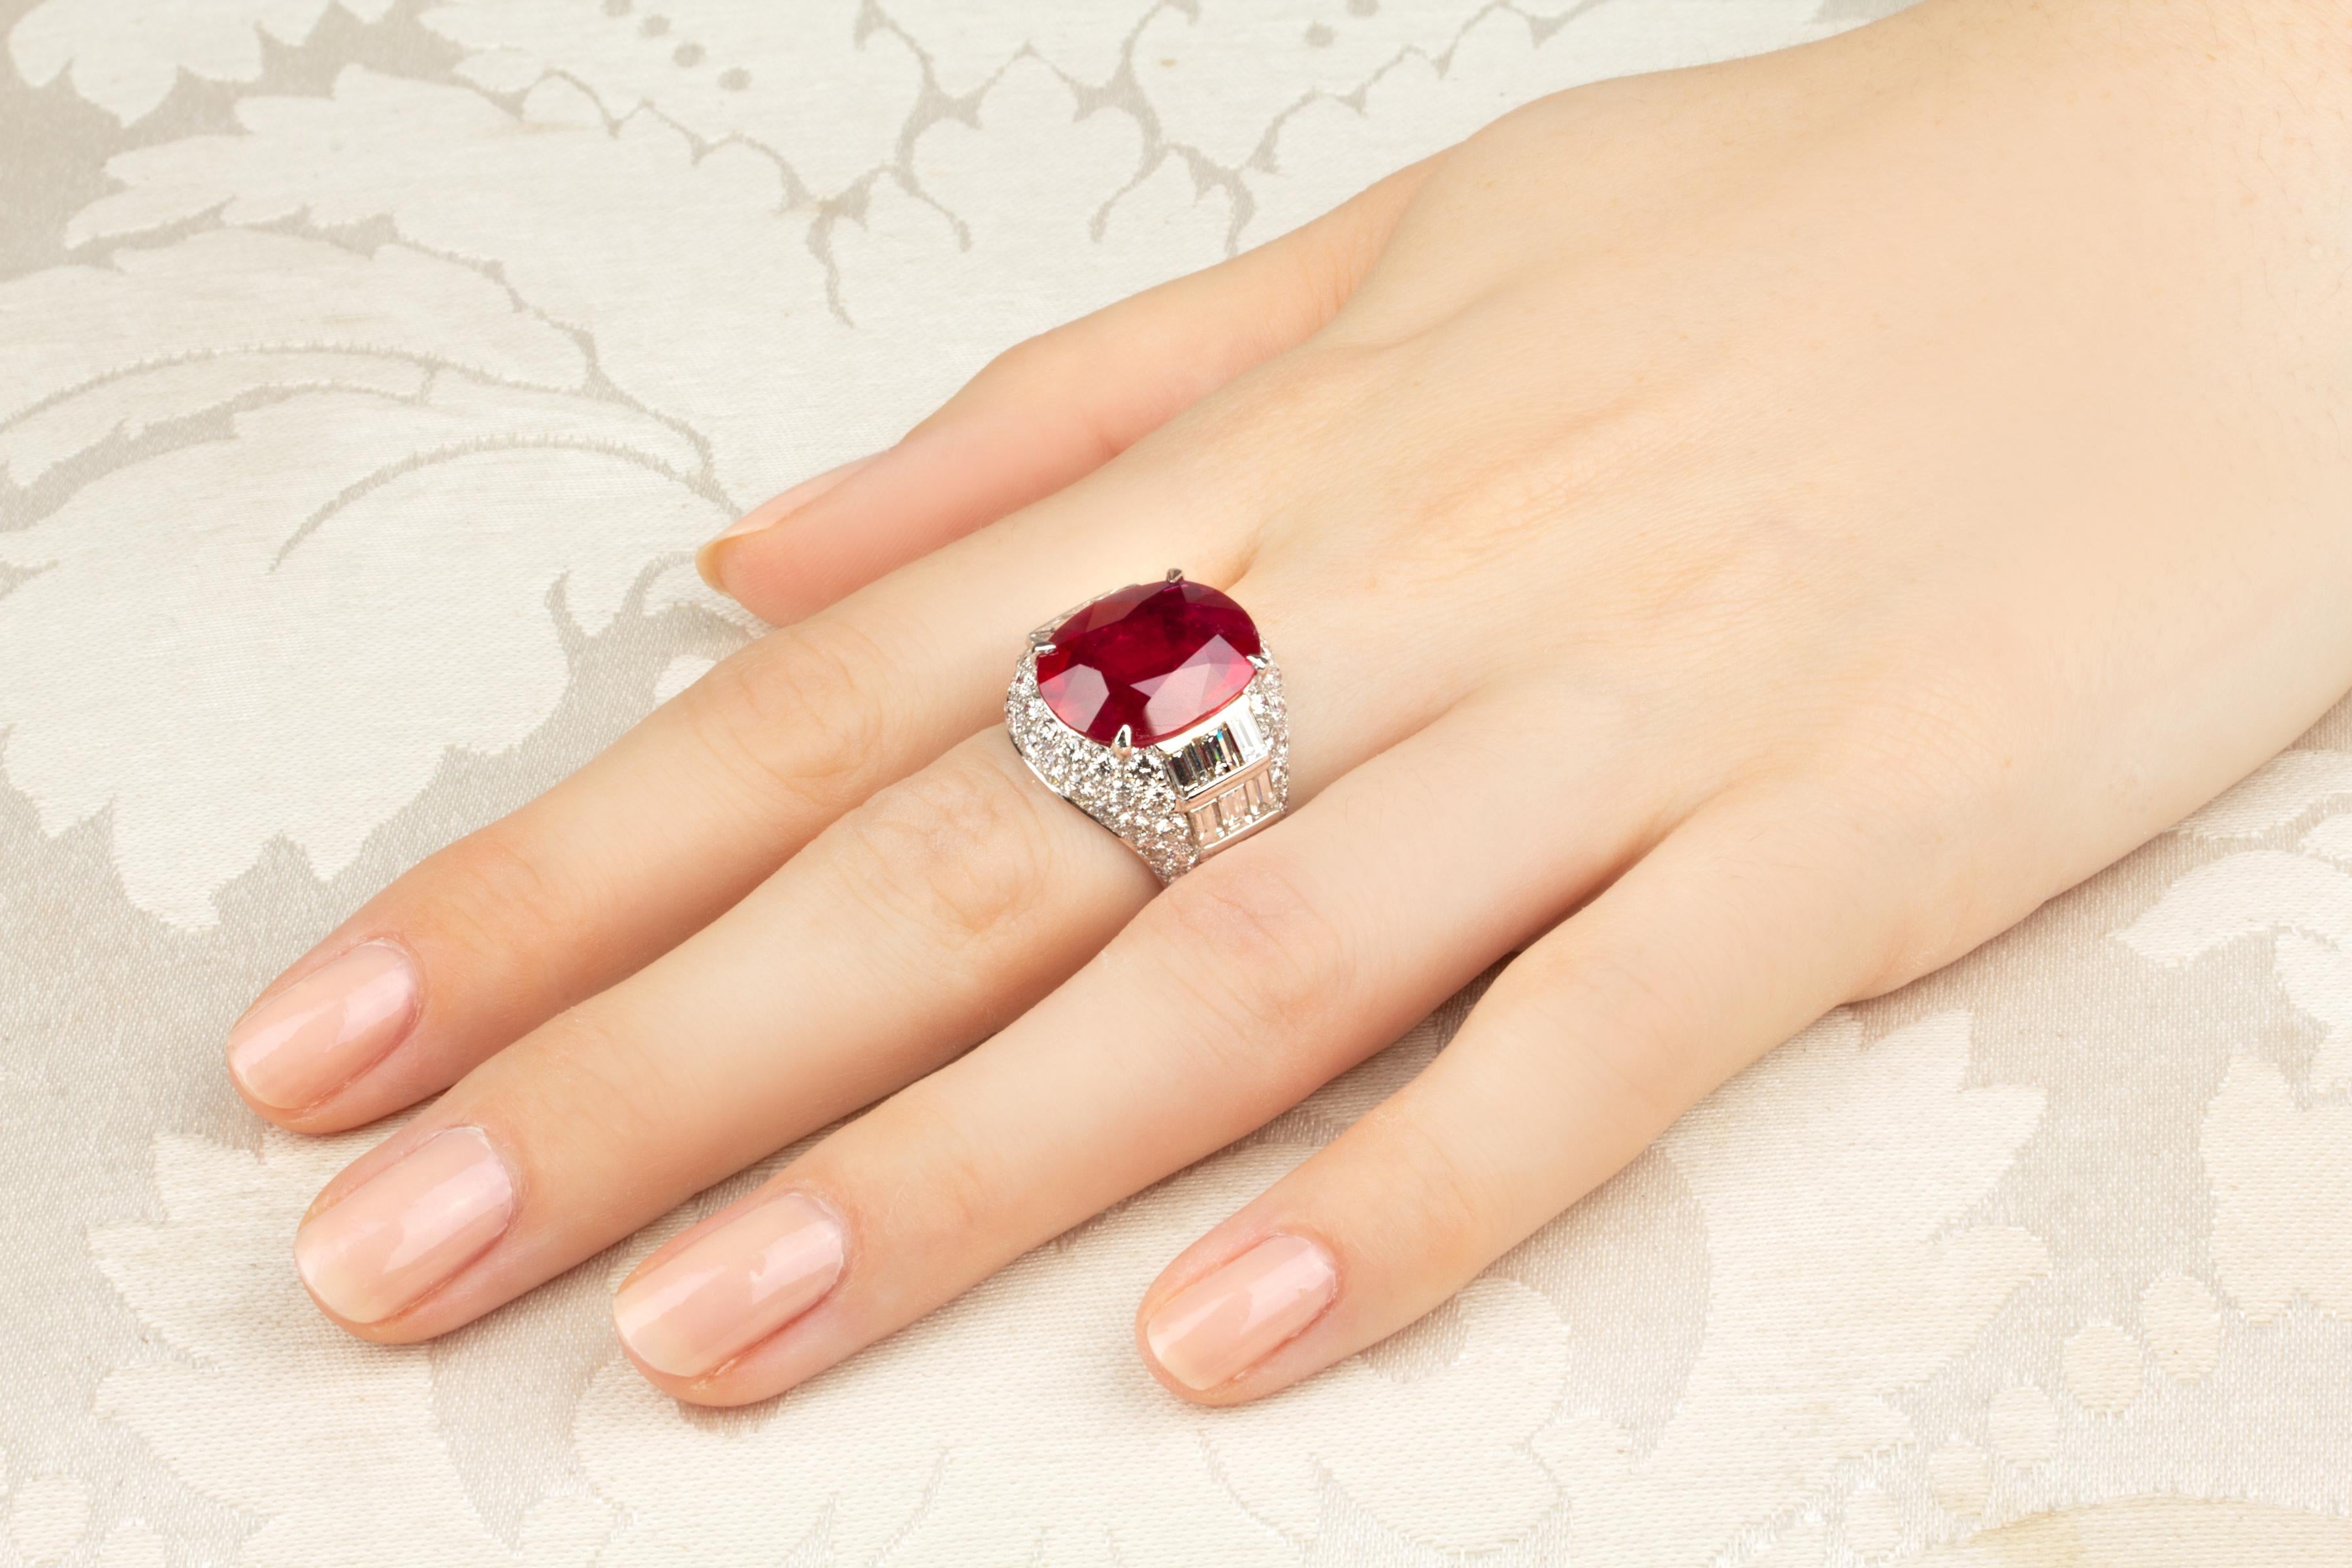 The ring features a splendid faceted oval-cut 9.08 carats Mozambique ruby of brilliant crystalline red color. The ruby is flanked by geometric rows of custom cut baguette diamonds (2.72 carats). The design is complete with a pavé of round diamonds